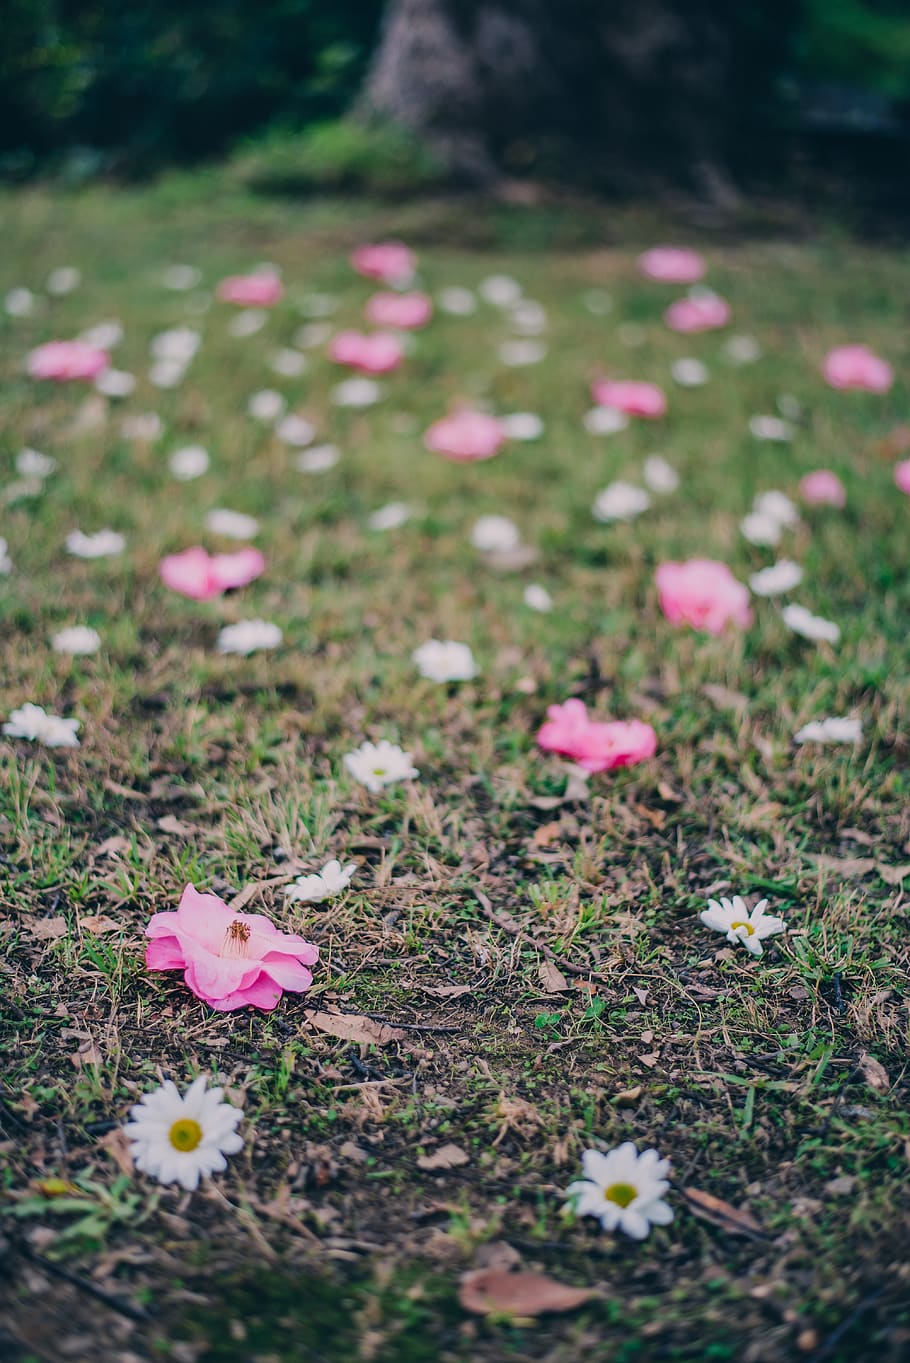 white and pink flowers, ground, blossom, plant, petal, rose, leaf